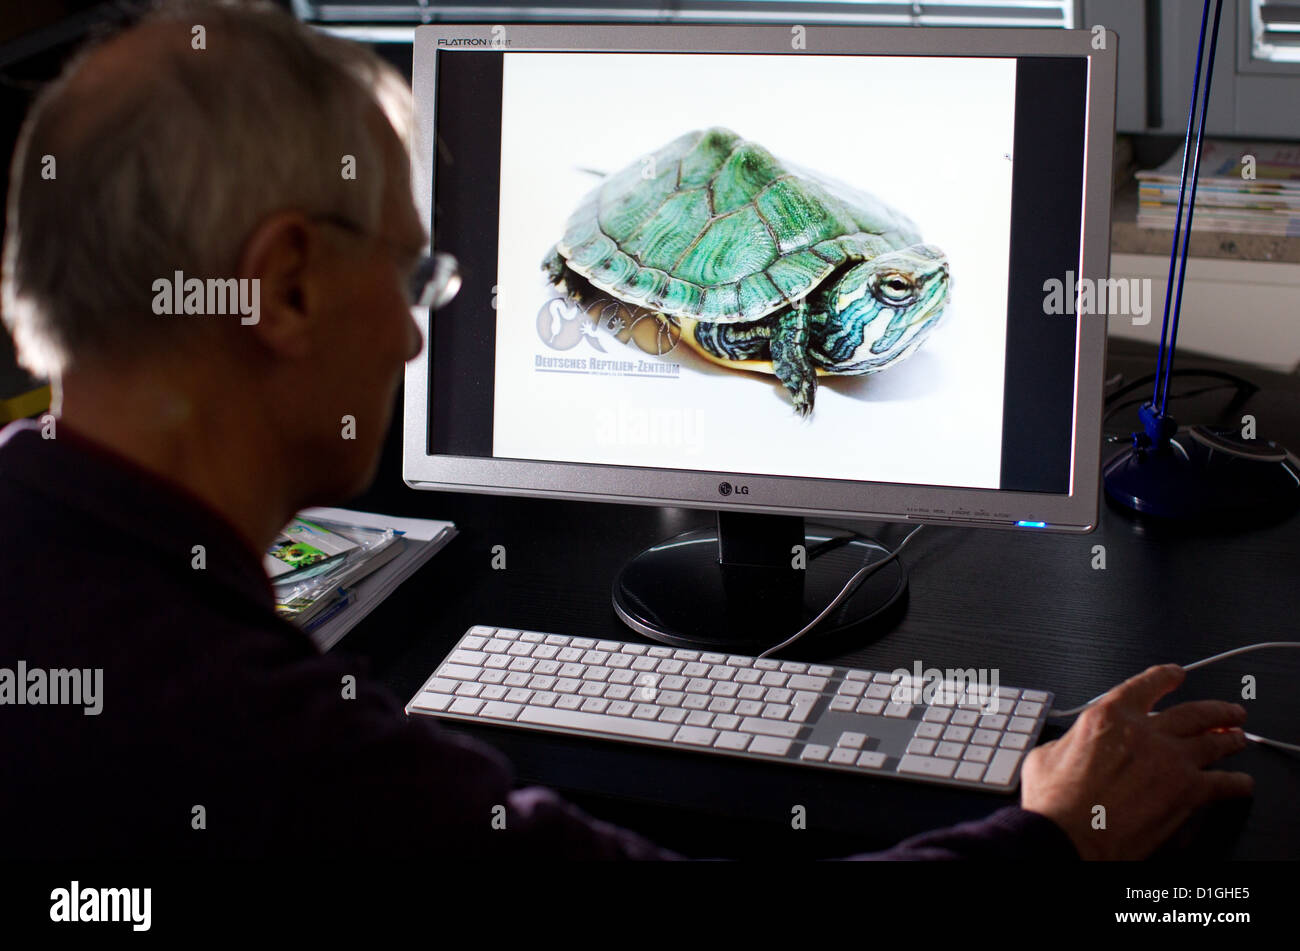 Doctor Karl Ernst von Muehlendahl sits in front a screen with a picture of a turtle at the Center for the Environment and Technology in Osnabrueck, Germany, 19 December 2012. The institute is warning against using animals as Christmas gifts. Yellow-bellied slider start off small but grow to be up to 20 centimeters large. Photo: FRISO GENTSCH Stock Photo